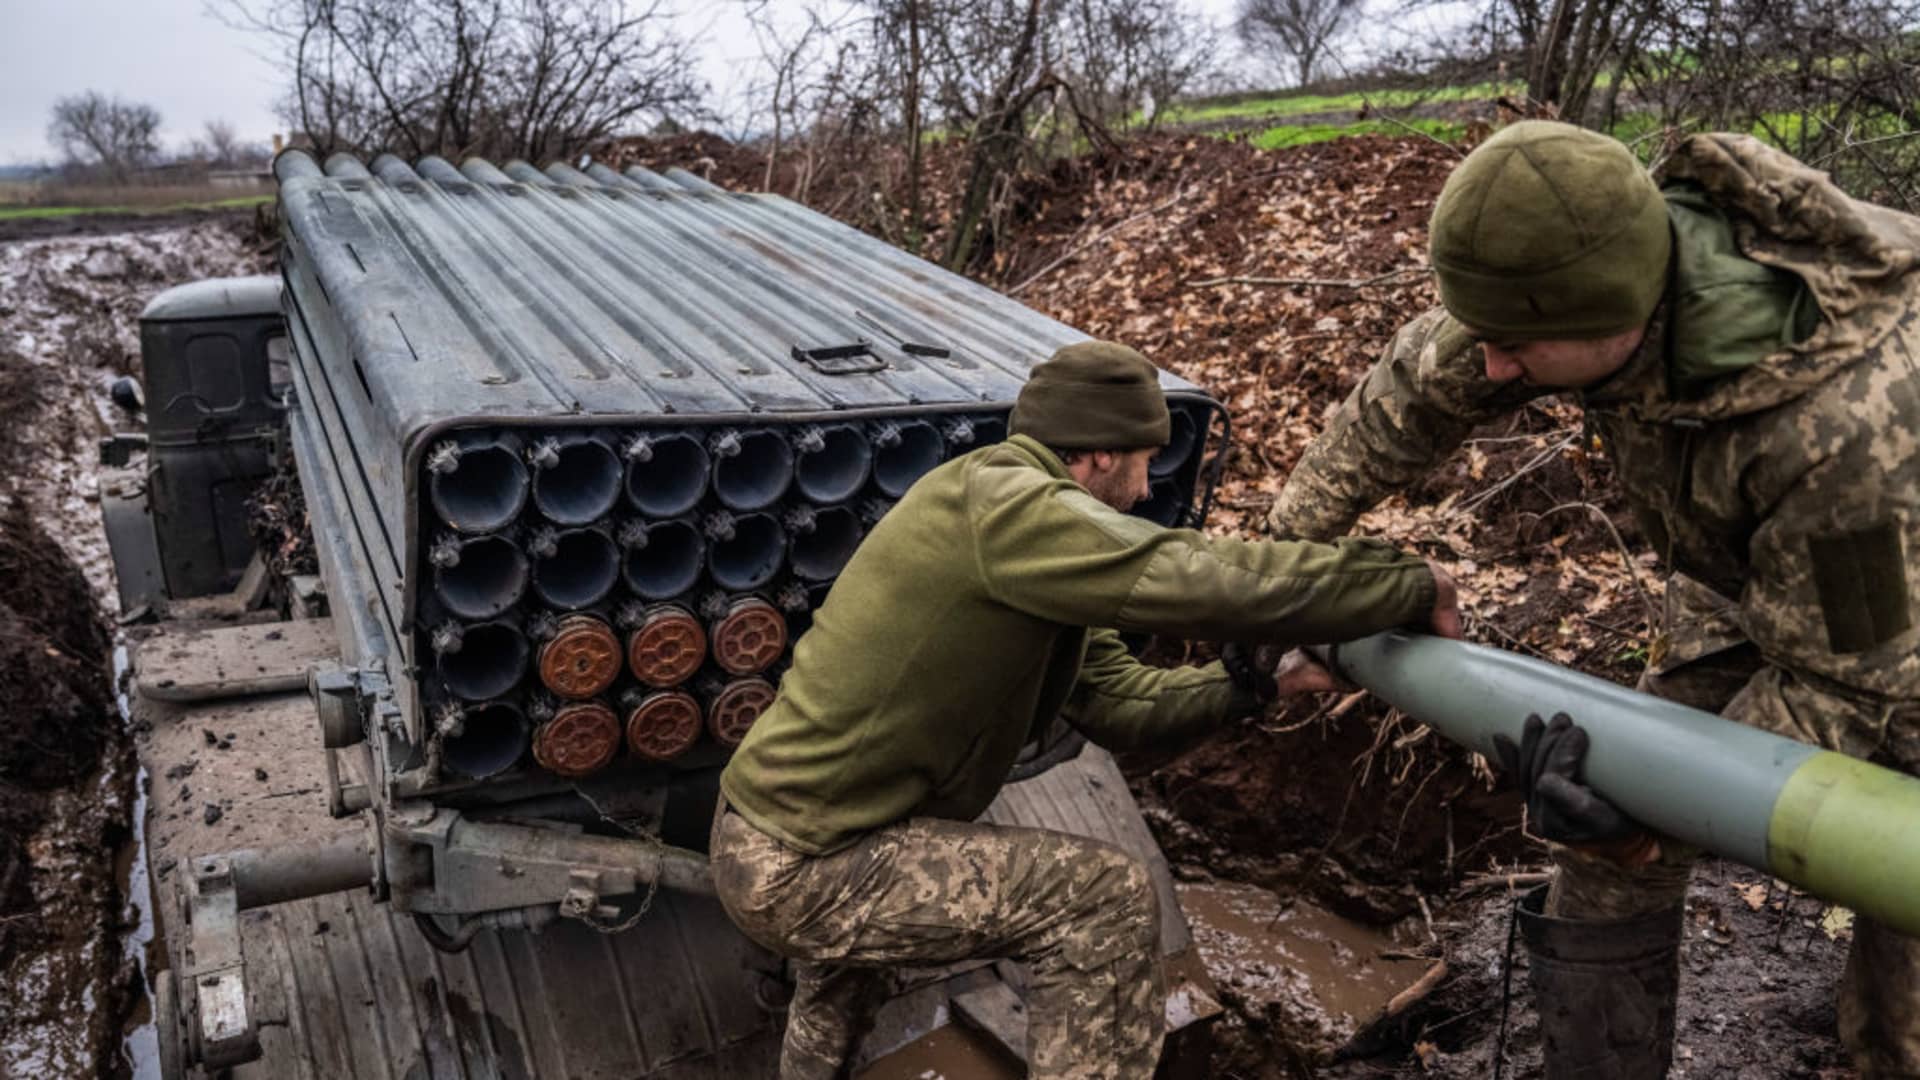 Soldiers from the 10th Mountain Assault Brigade of Ukraine unload munitions from a BM-21 Grad multiple rocket launcher near the frontlines in Donbas, Ukraine.